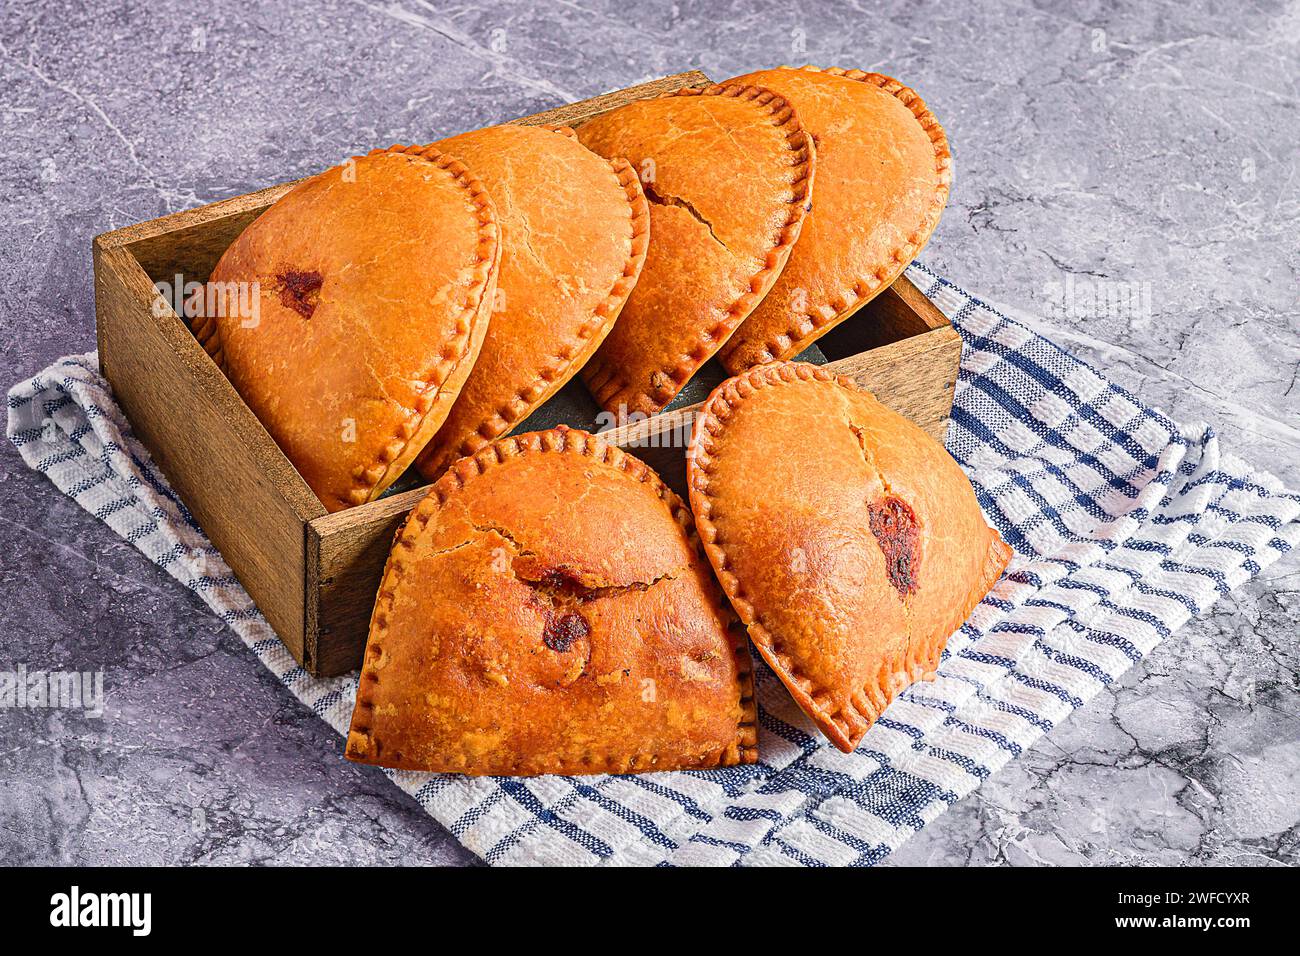 Three pastries in a rustic wooden box placed on a charming blue and white checked cloths Stock Photo